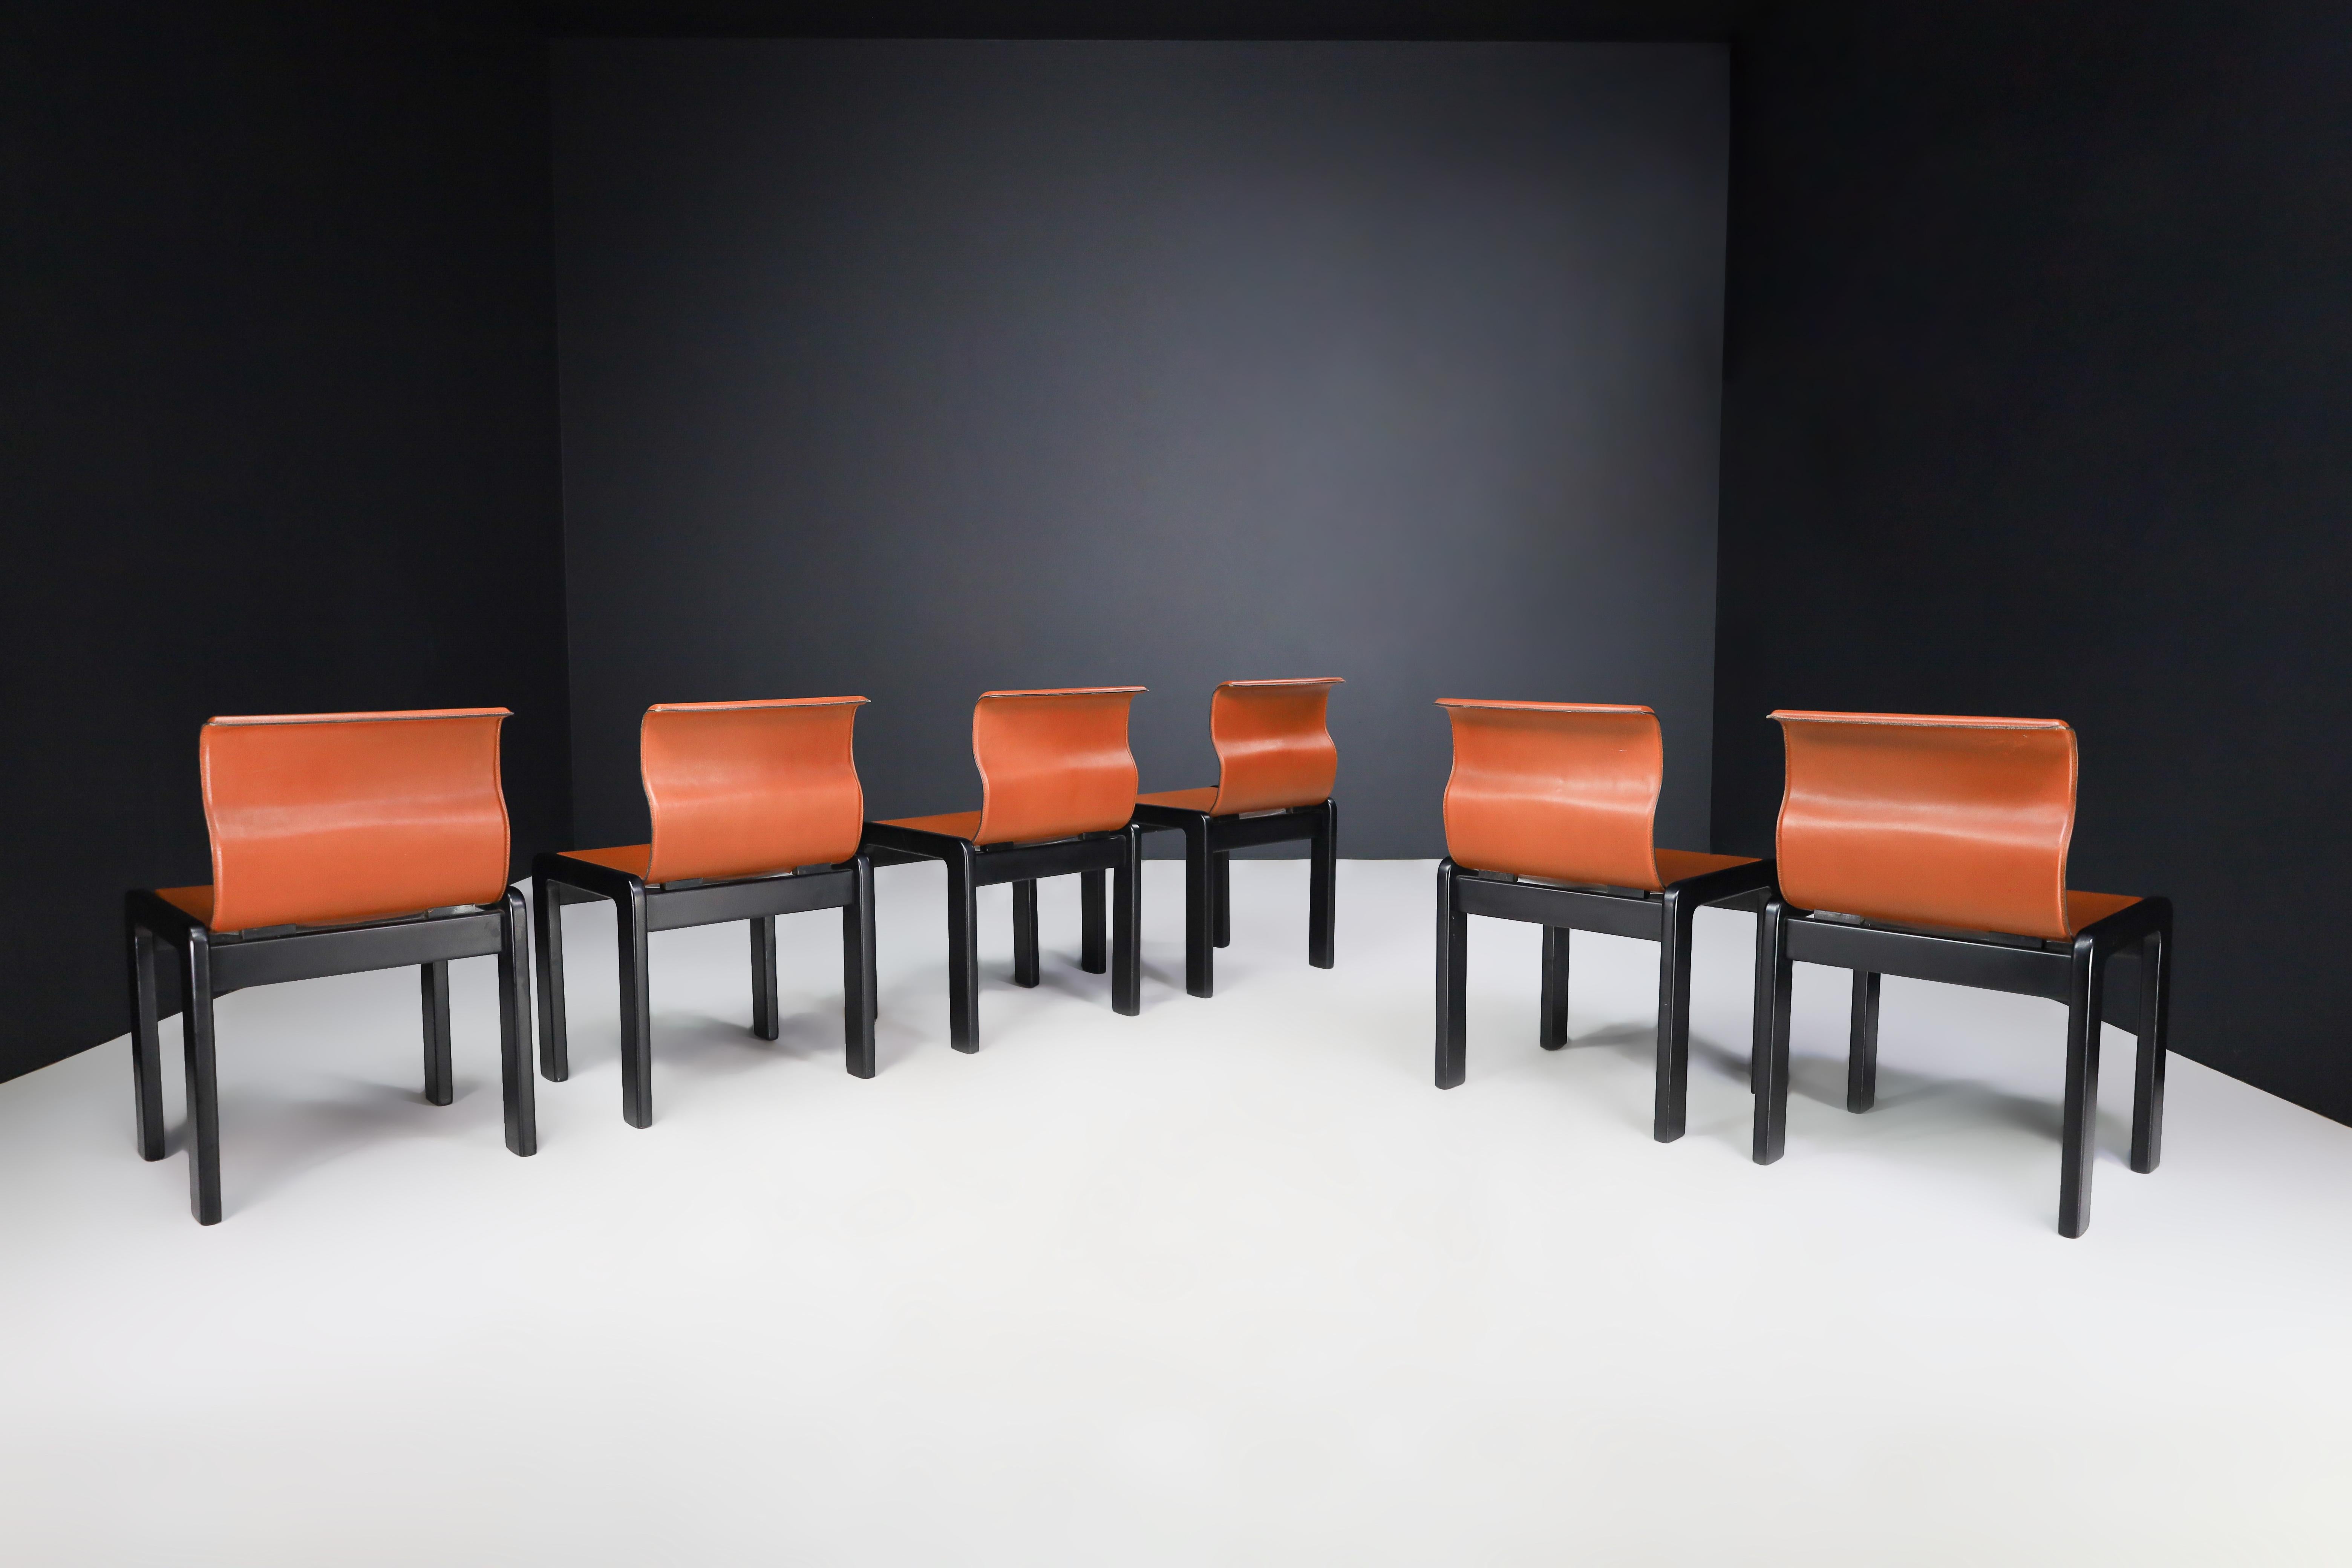 Italian Afra & Tobia Scarpa set of six Dining Room Chairs in Cognac Leather, Italy 1966 For Sale